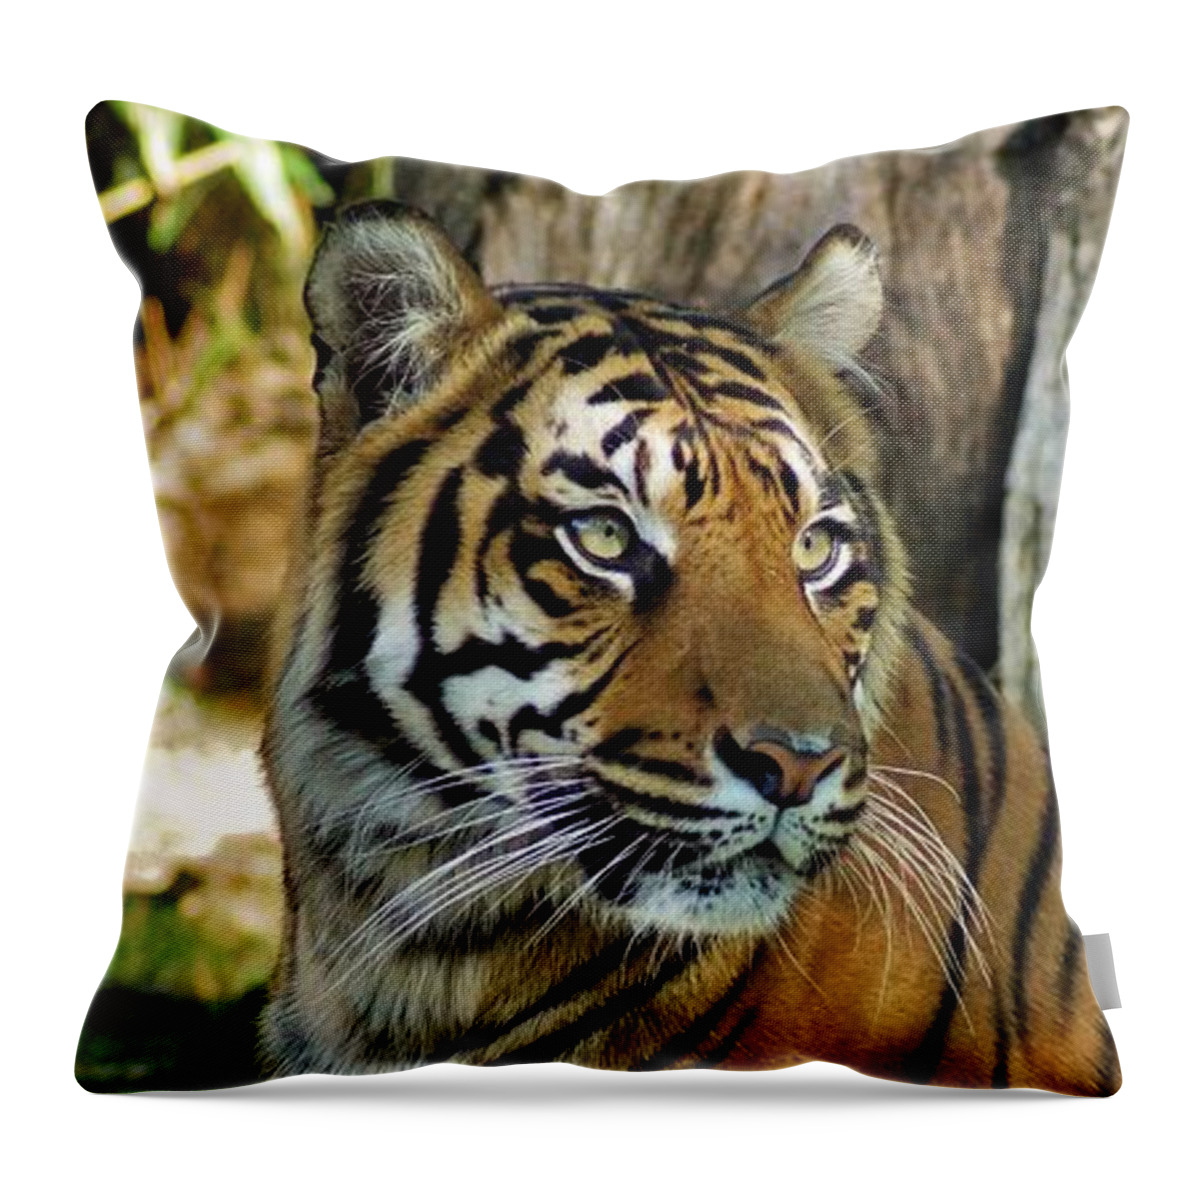 Tiger Throw Pillow featuring the photograph Tiger's Eyes by Jean Goodwin Brooks